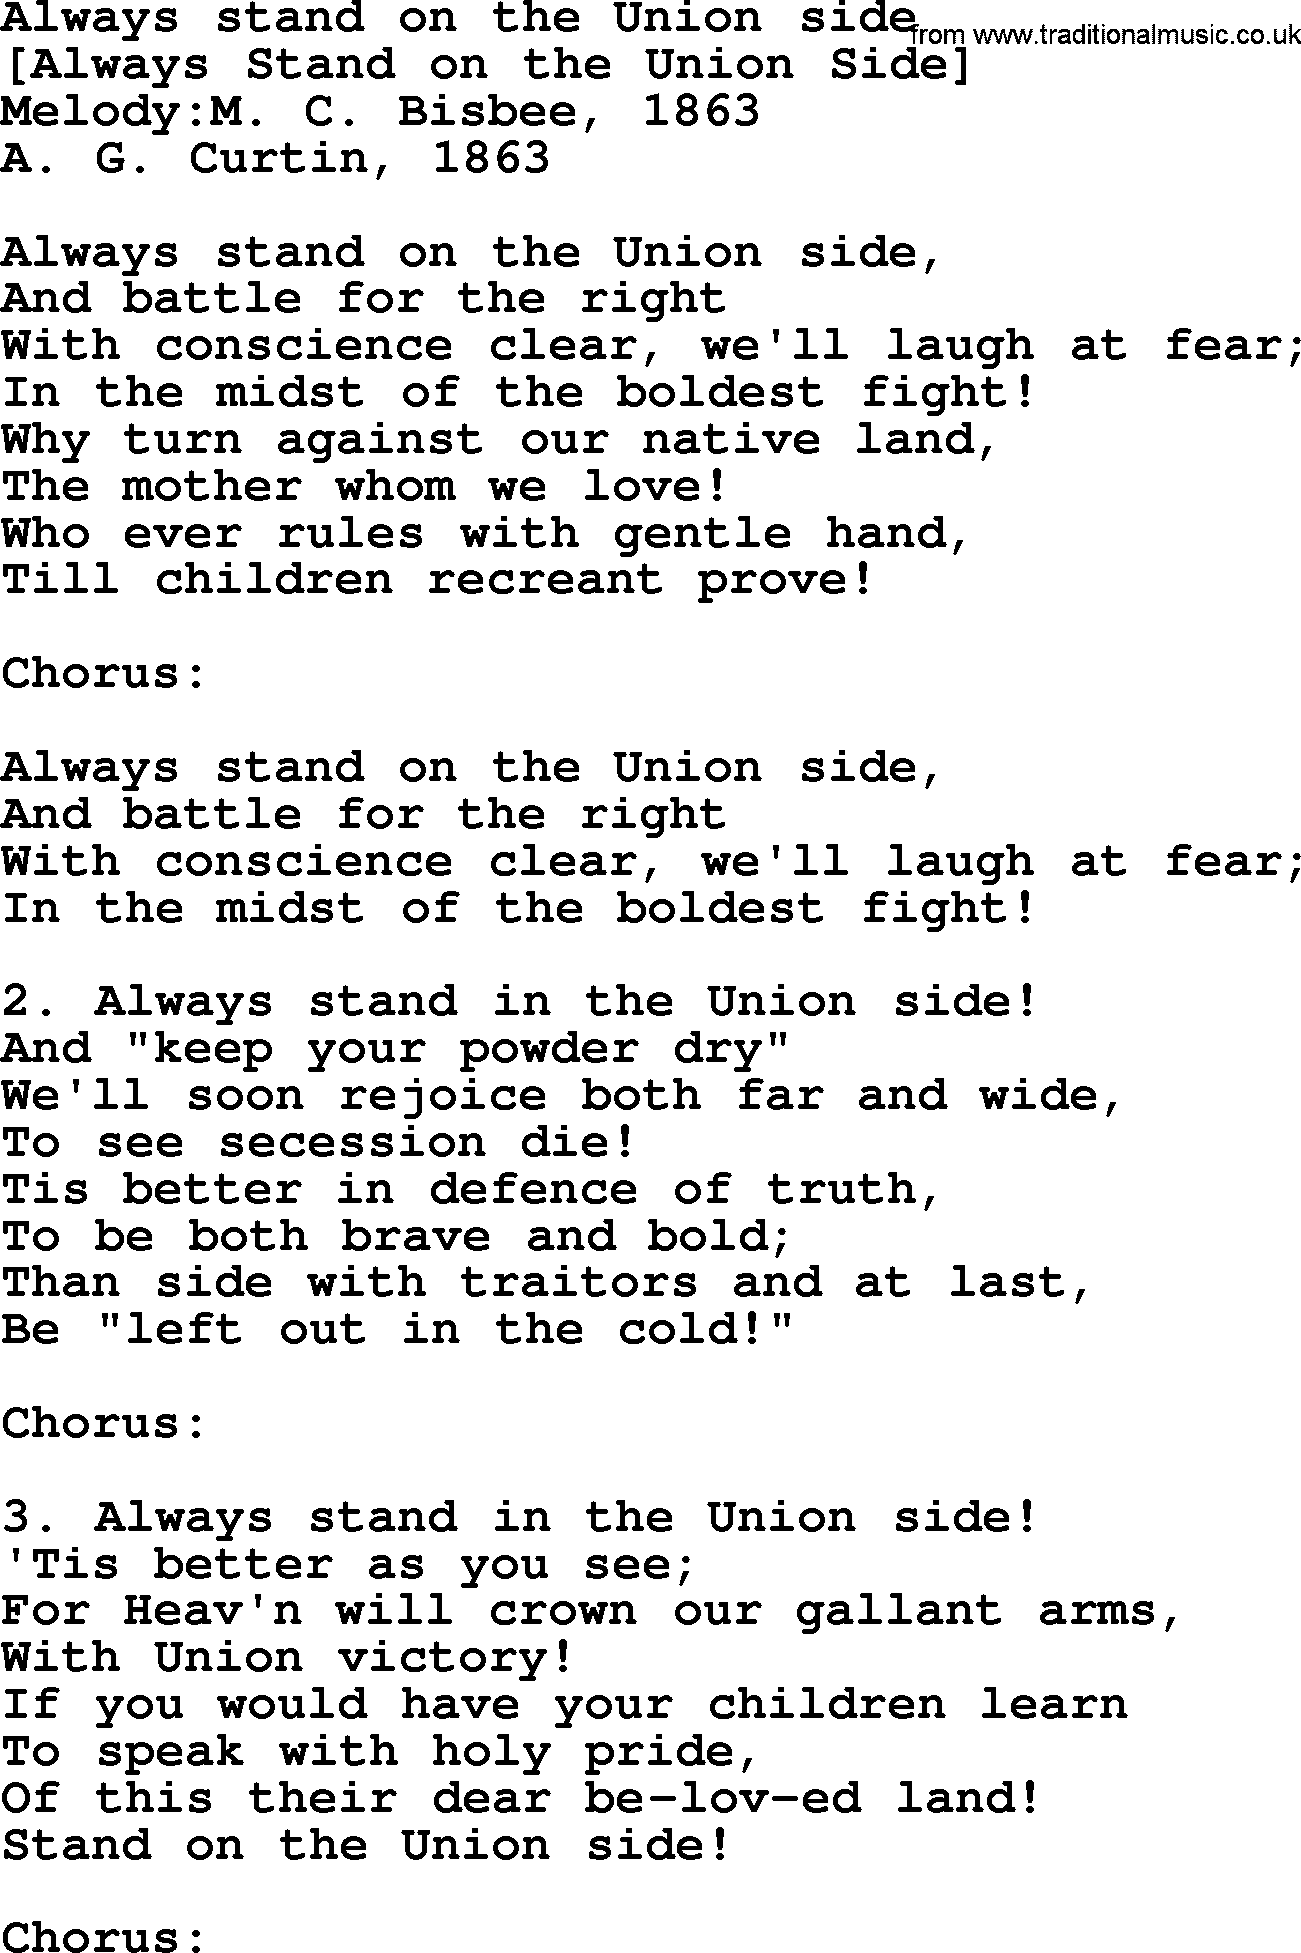 Old American Song: Always Stand On The Union Side, lyrics